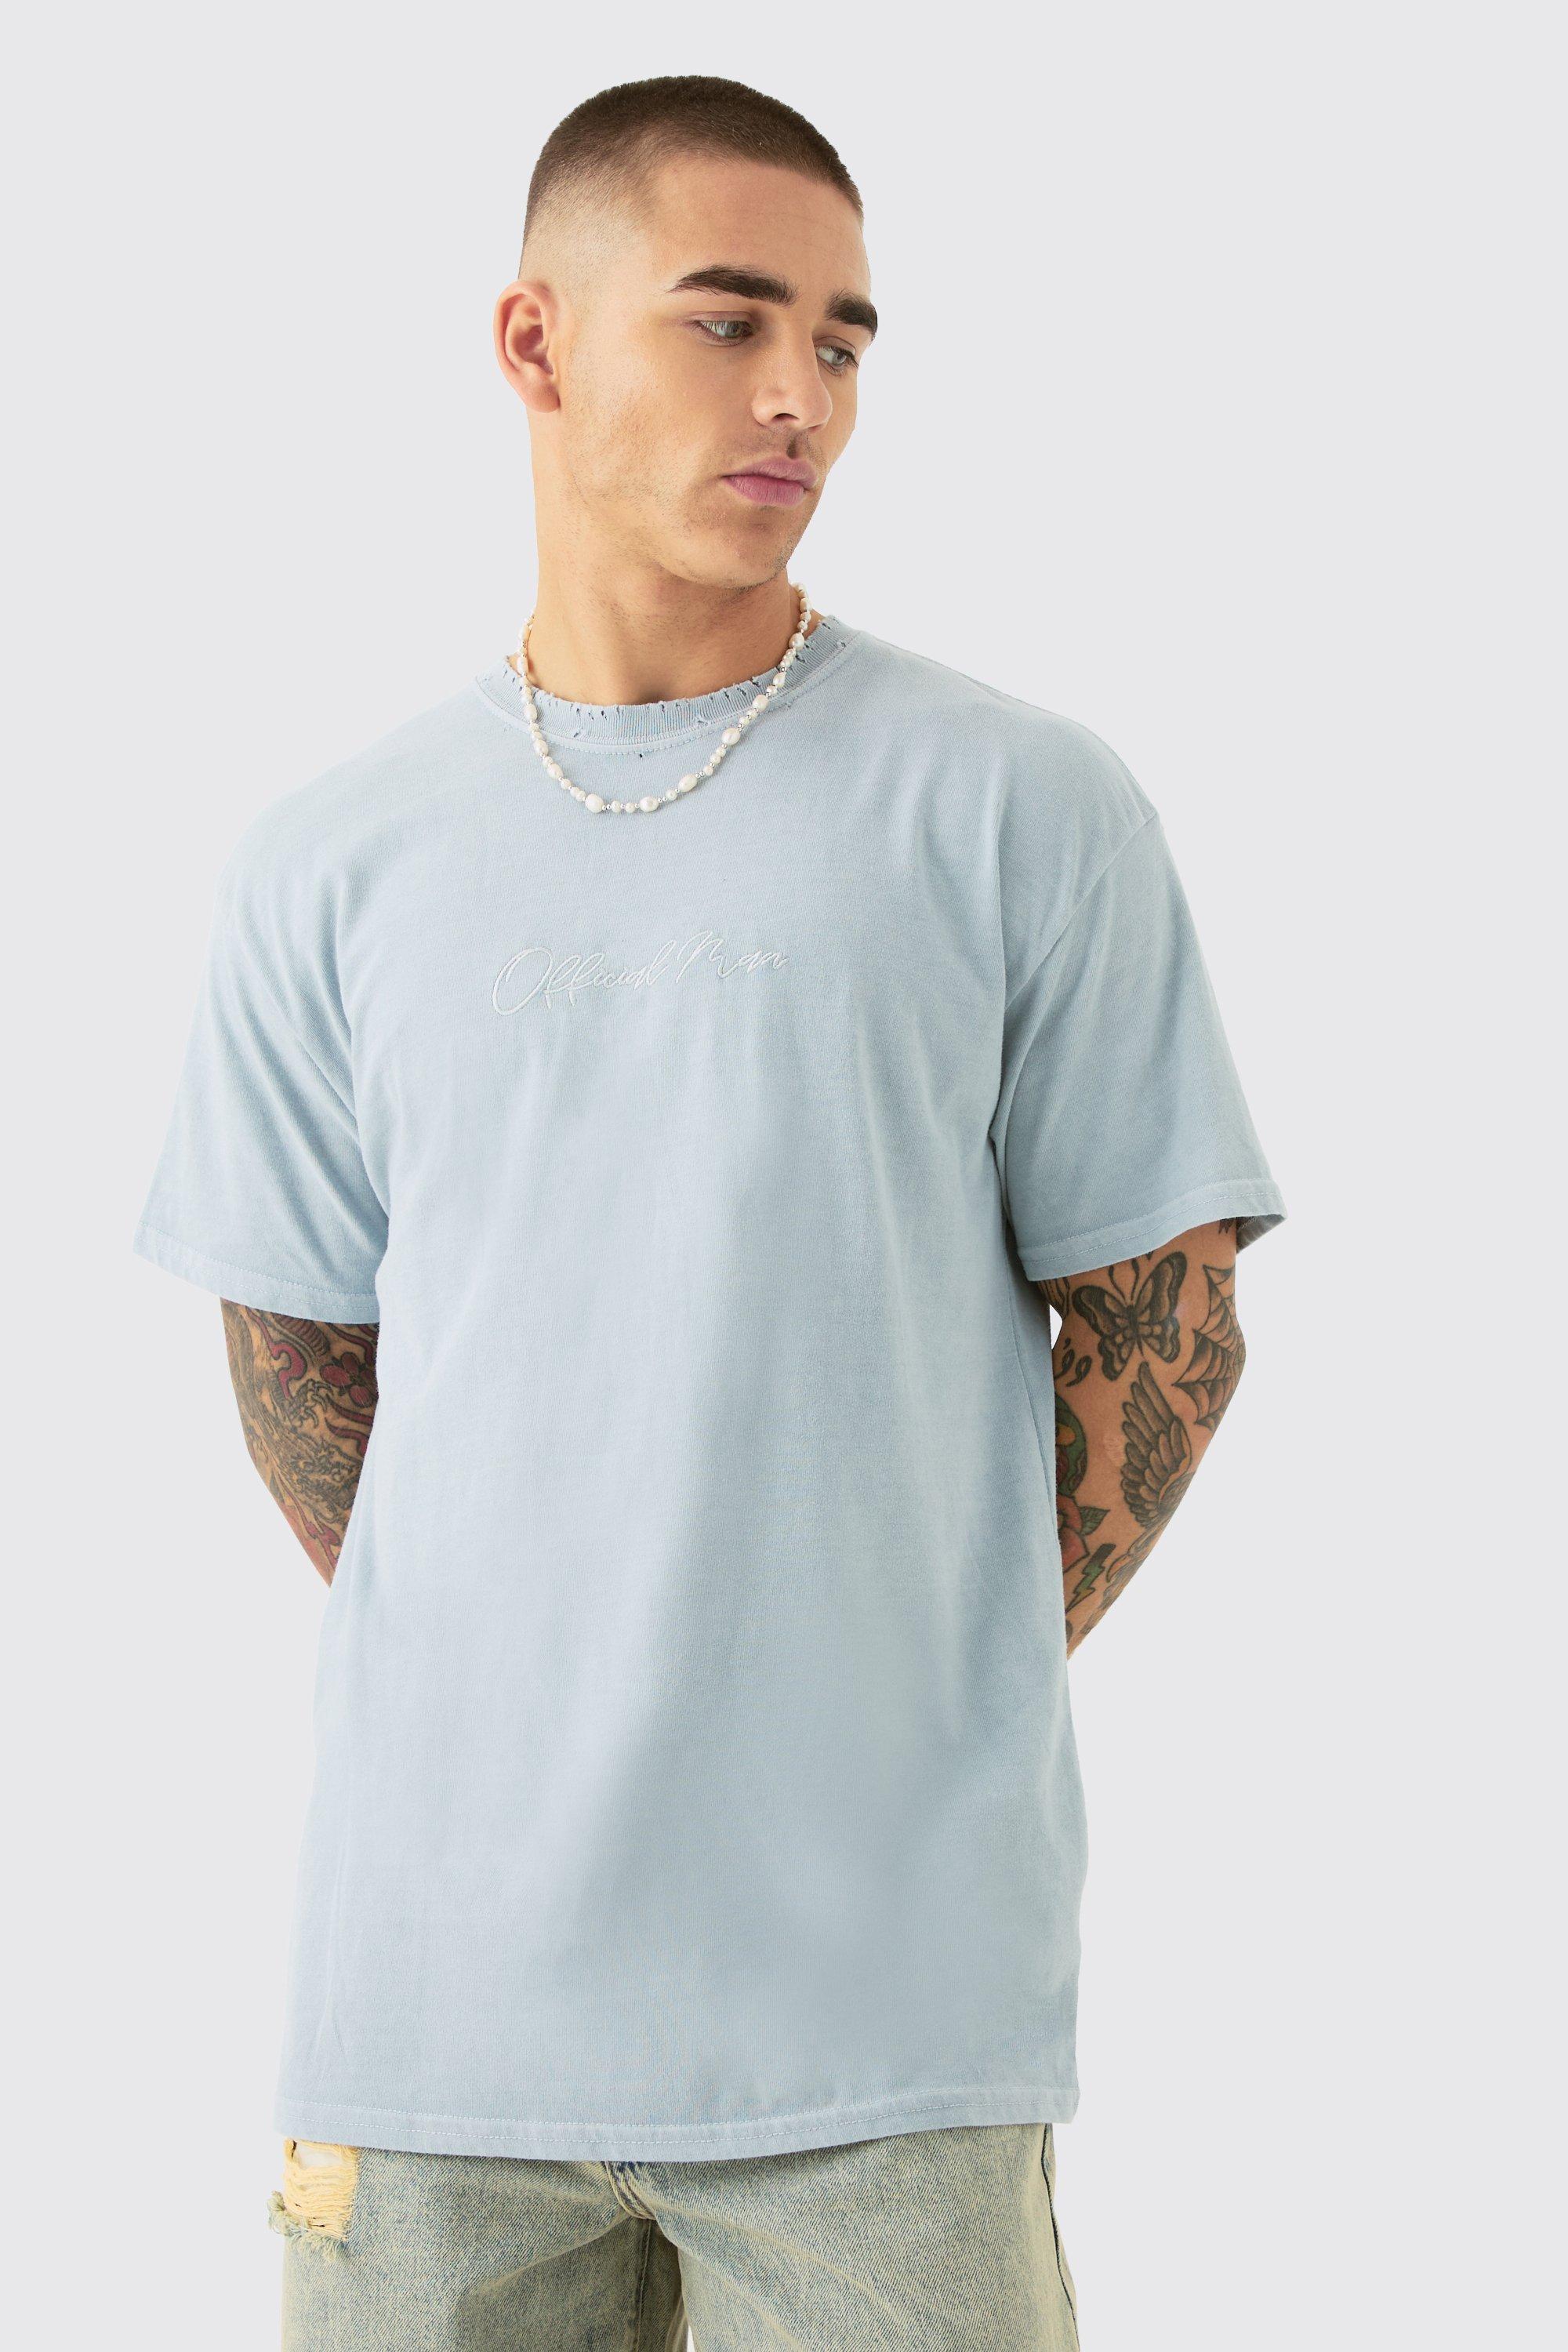 Image of Oversized Distressed Embroidered T-shirt, Grigio